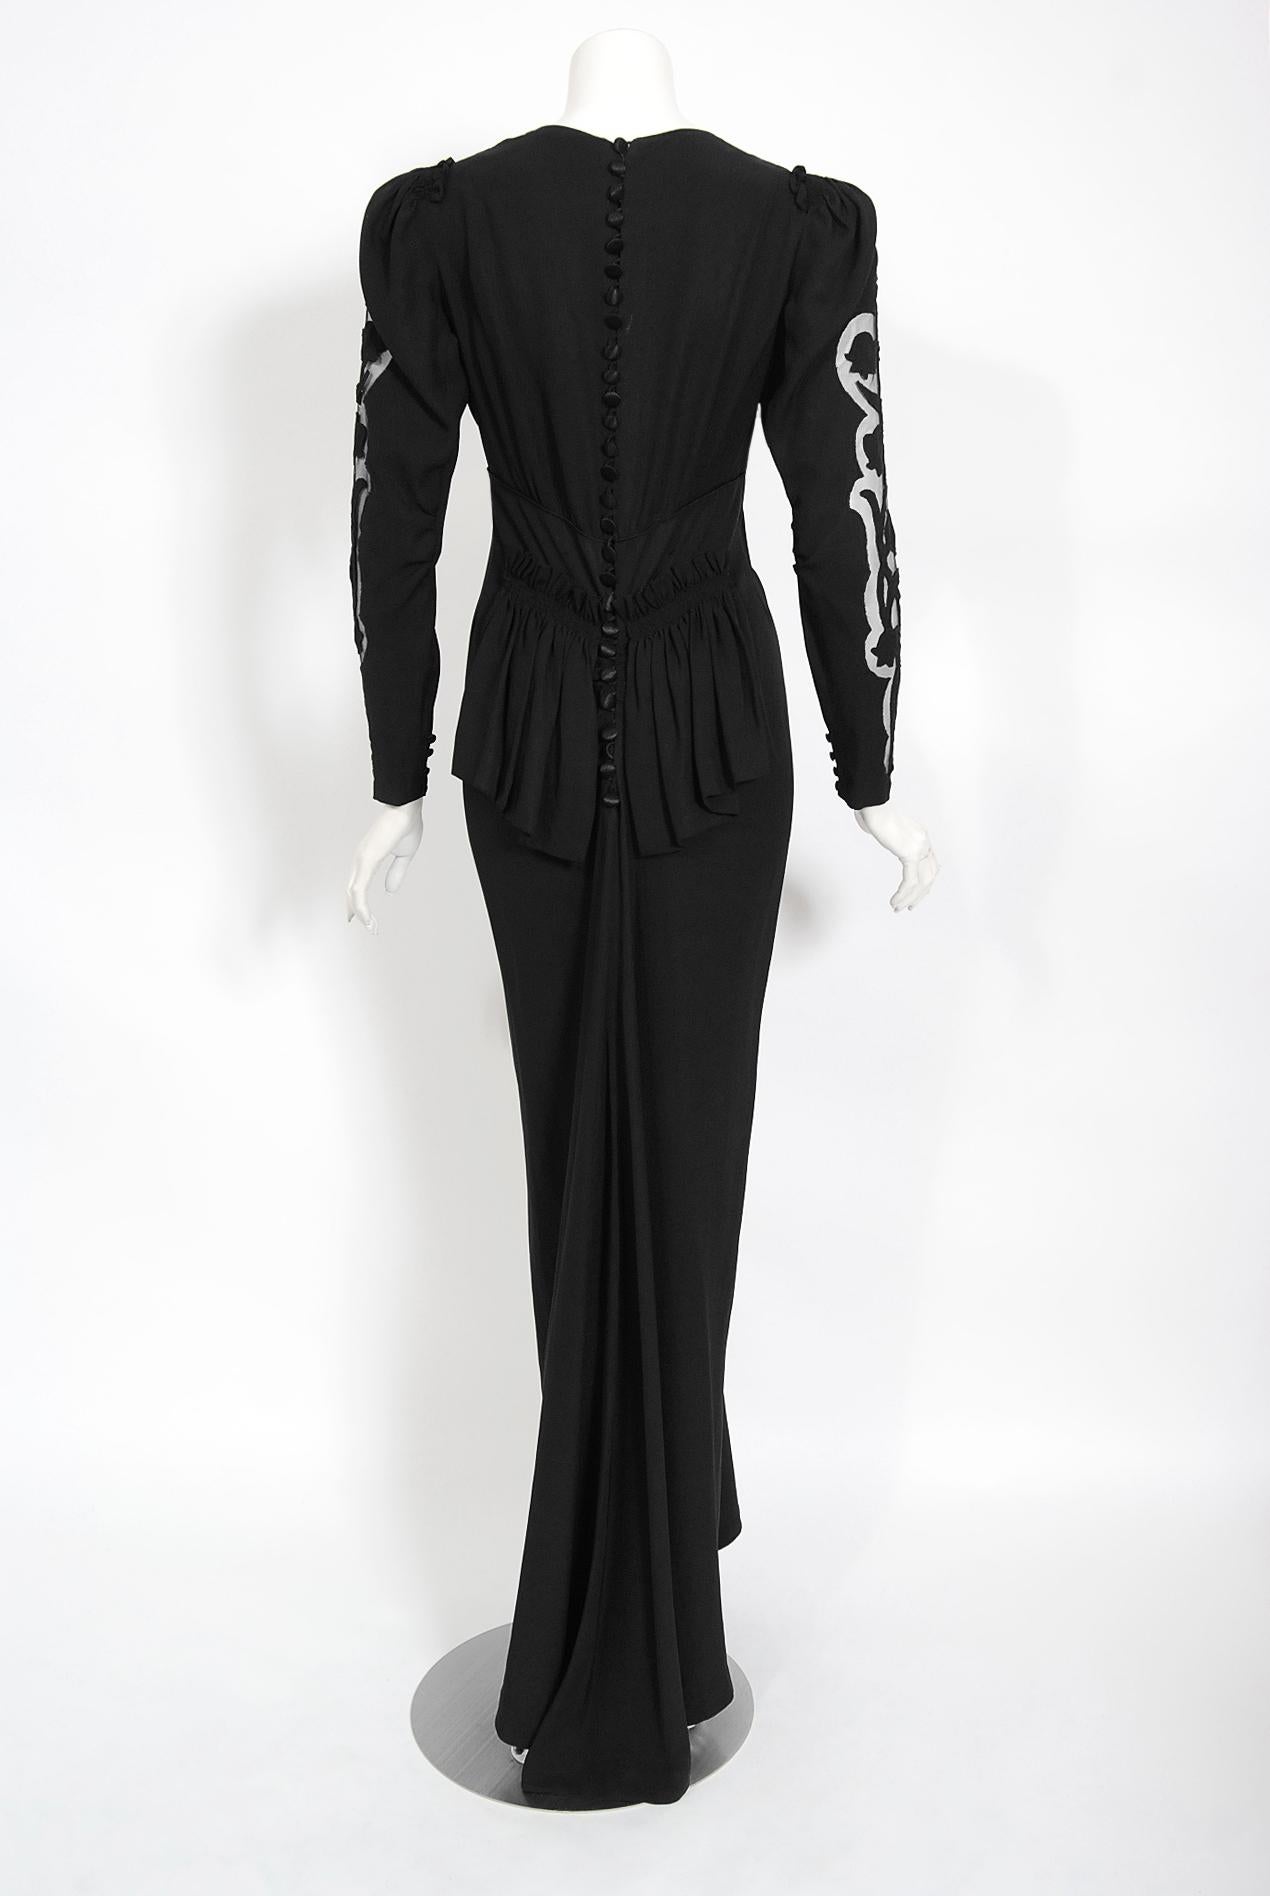 Vintage 1930's Suzanne Rabot Couture Black Silk Sheer Illusion Bias-Cut Gown 3